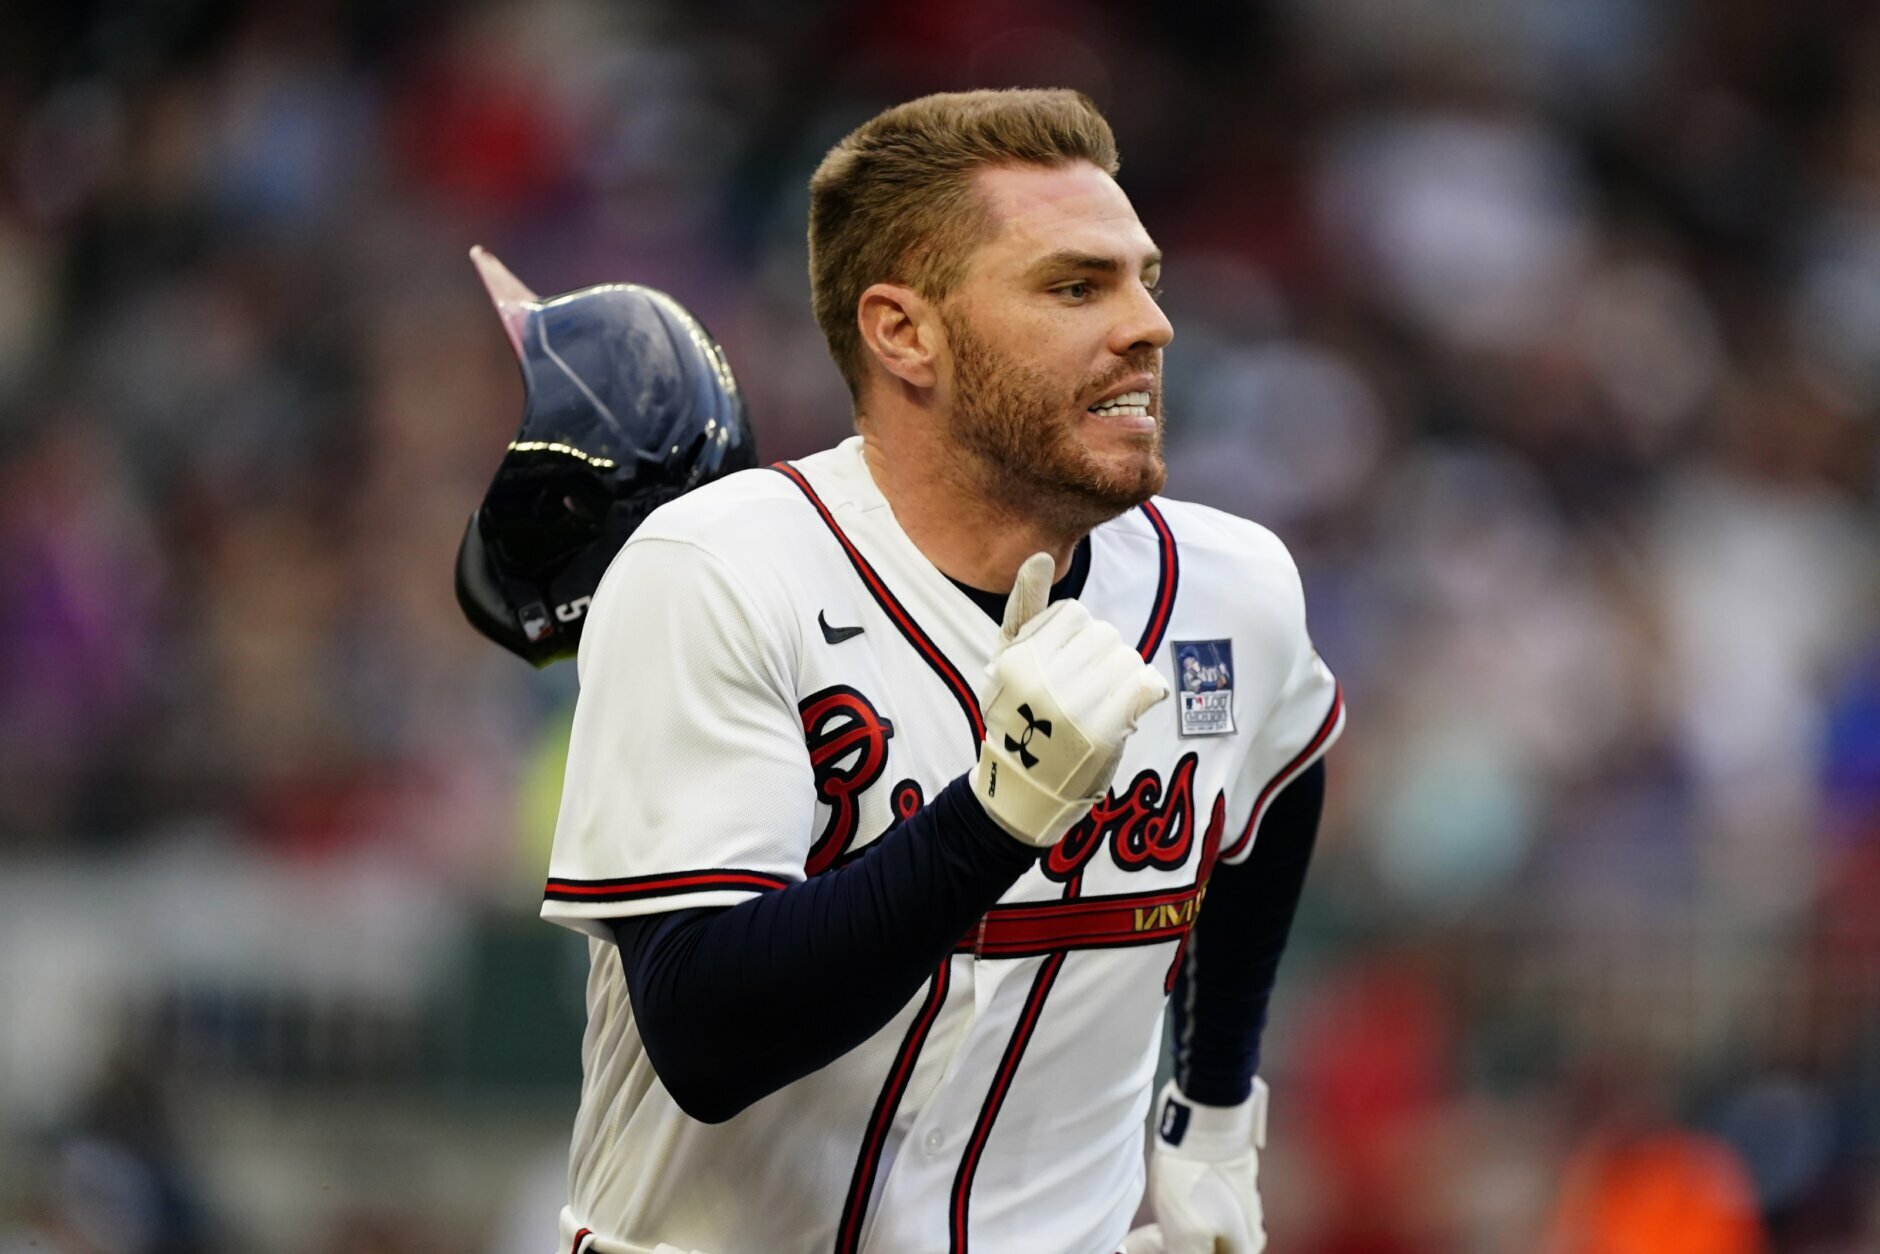 Gomes' homer in 8th lifts Nationals over Braves, 5-3 - WTOP News